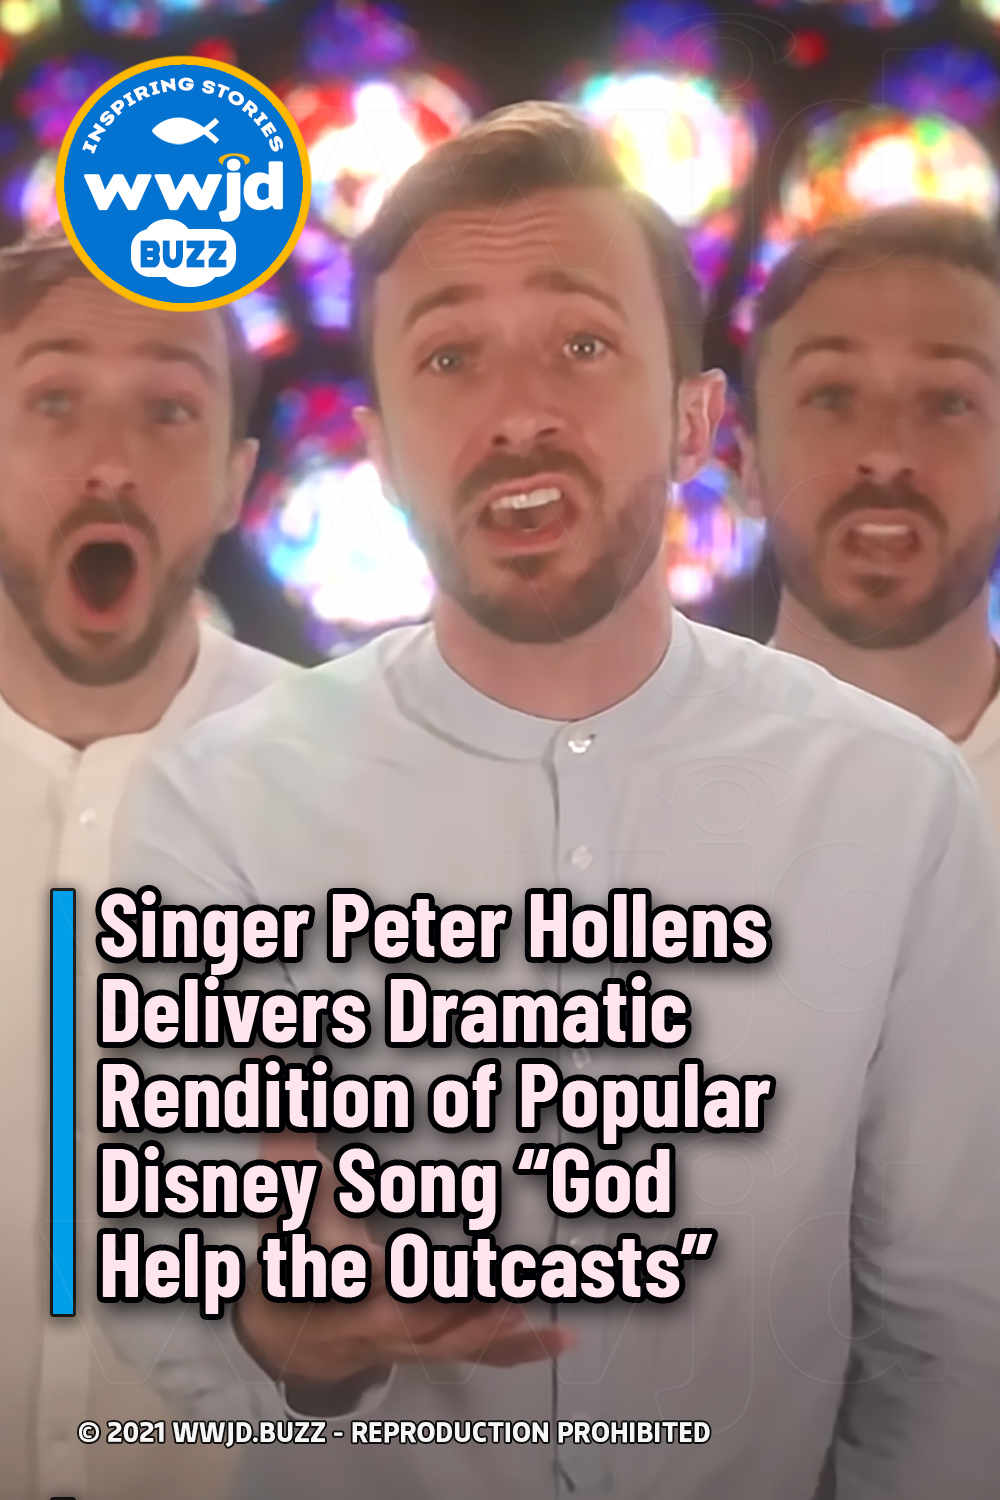 Singer Peter Hollens Delivers Dramatic Rendition of Popular Disney Song “God Help the Outcasts”